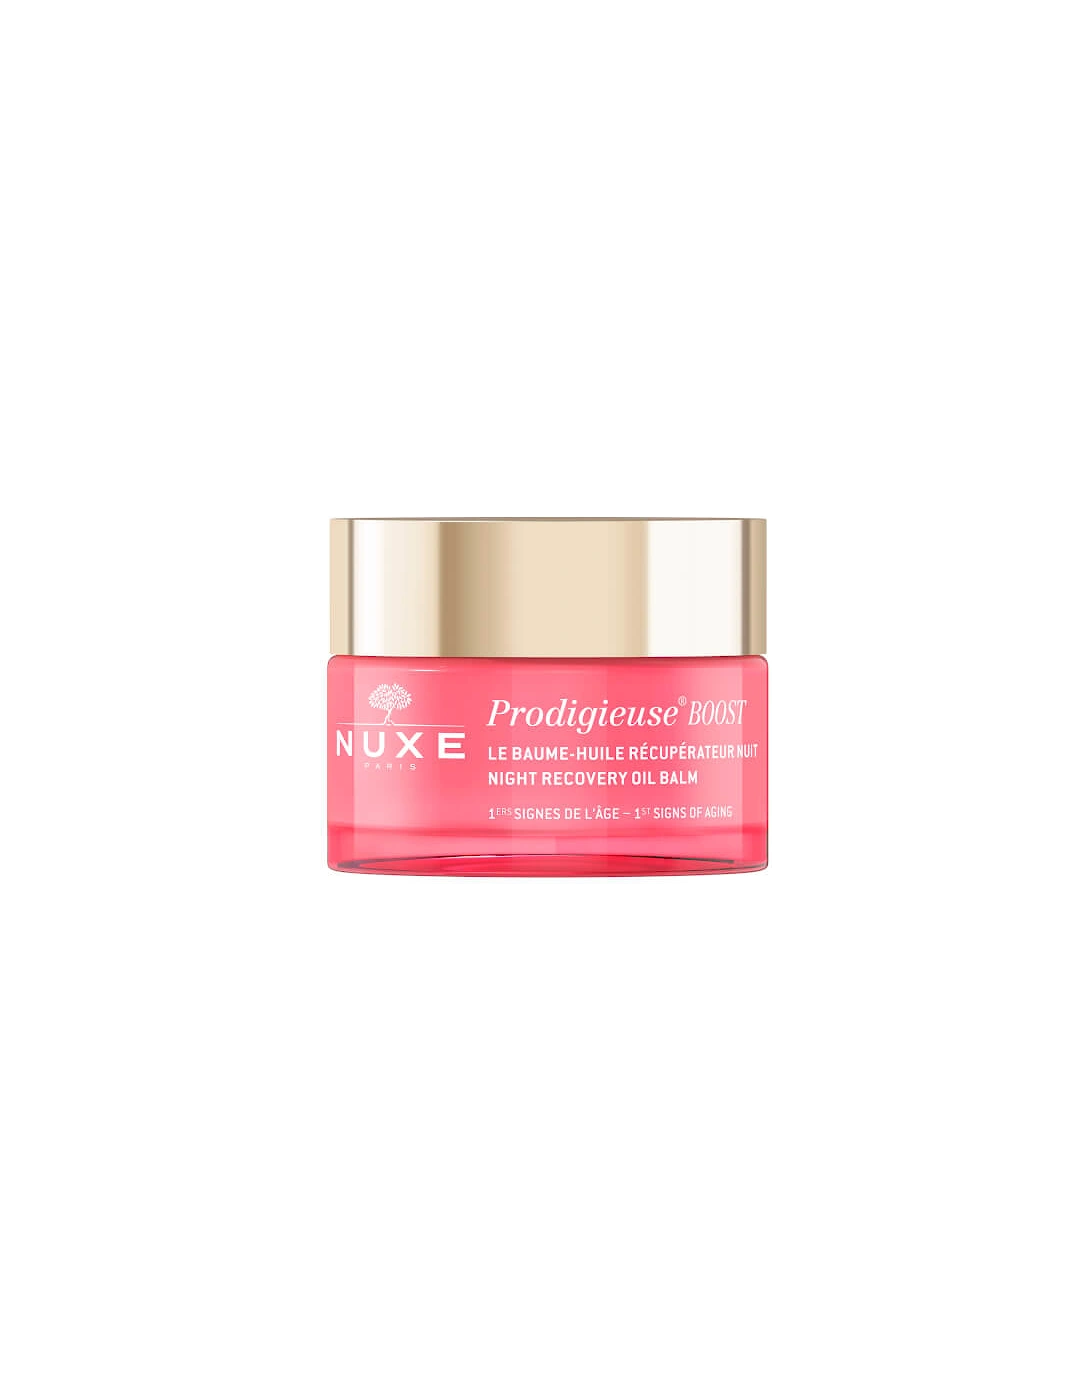 Creme Prodigieuse Boost-Night Recovery Oil Balm - NUXE, 2 of 1